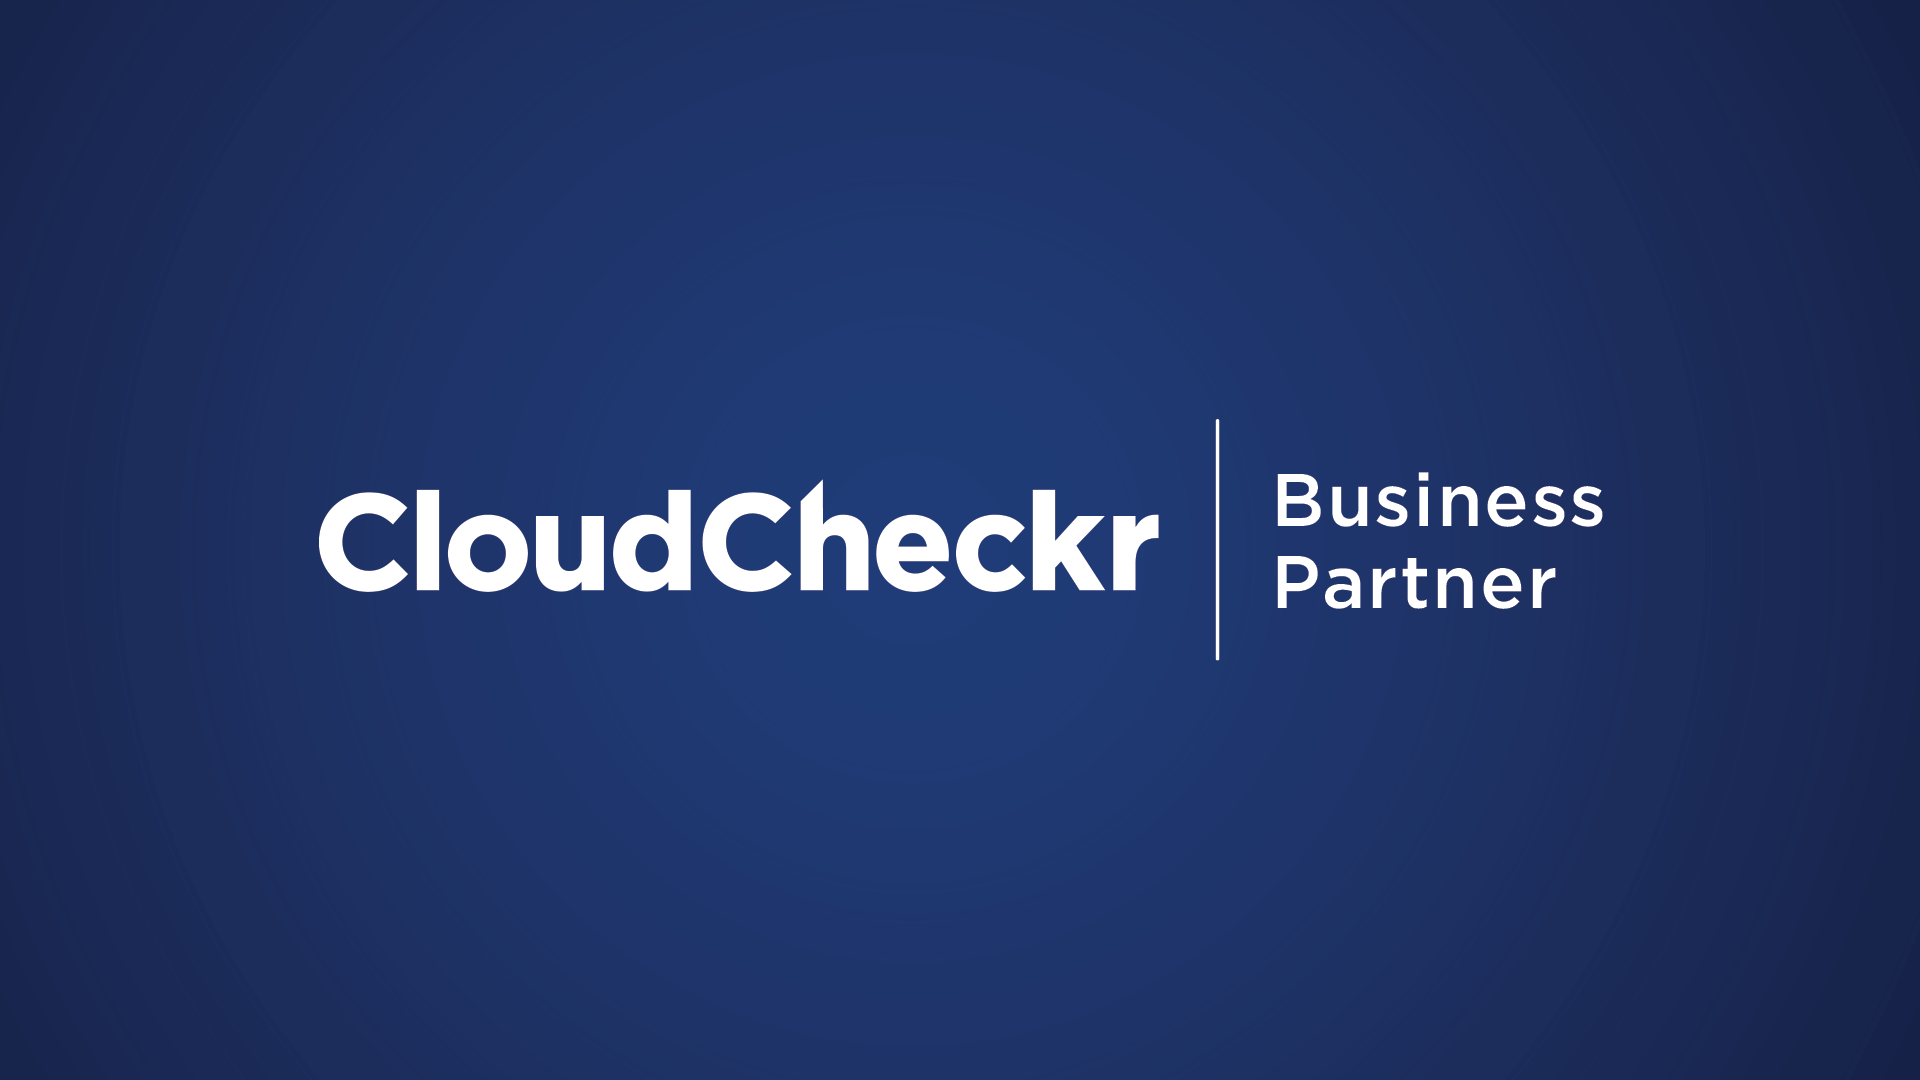 CloudCheckr Business Partner Program enables cloud service and IaaS resellers to build a profitable cloud practice on top of industry-leading public and hybrid cloud management.